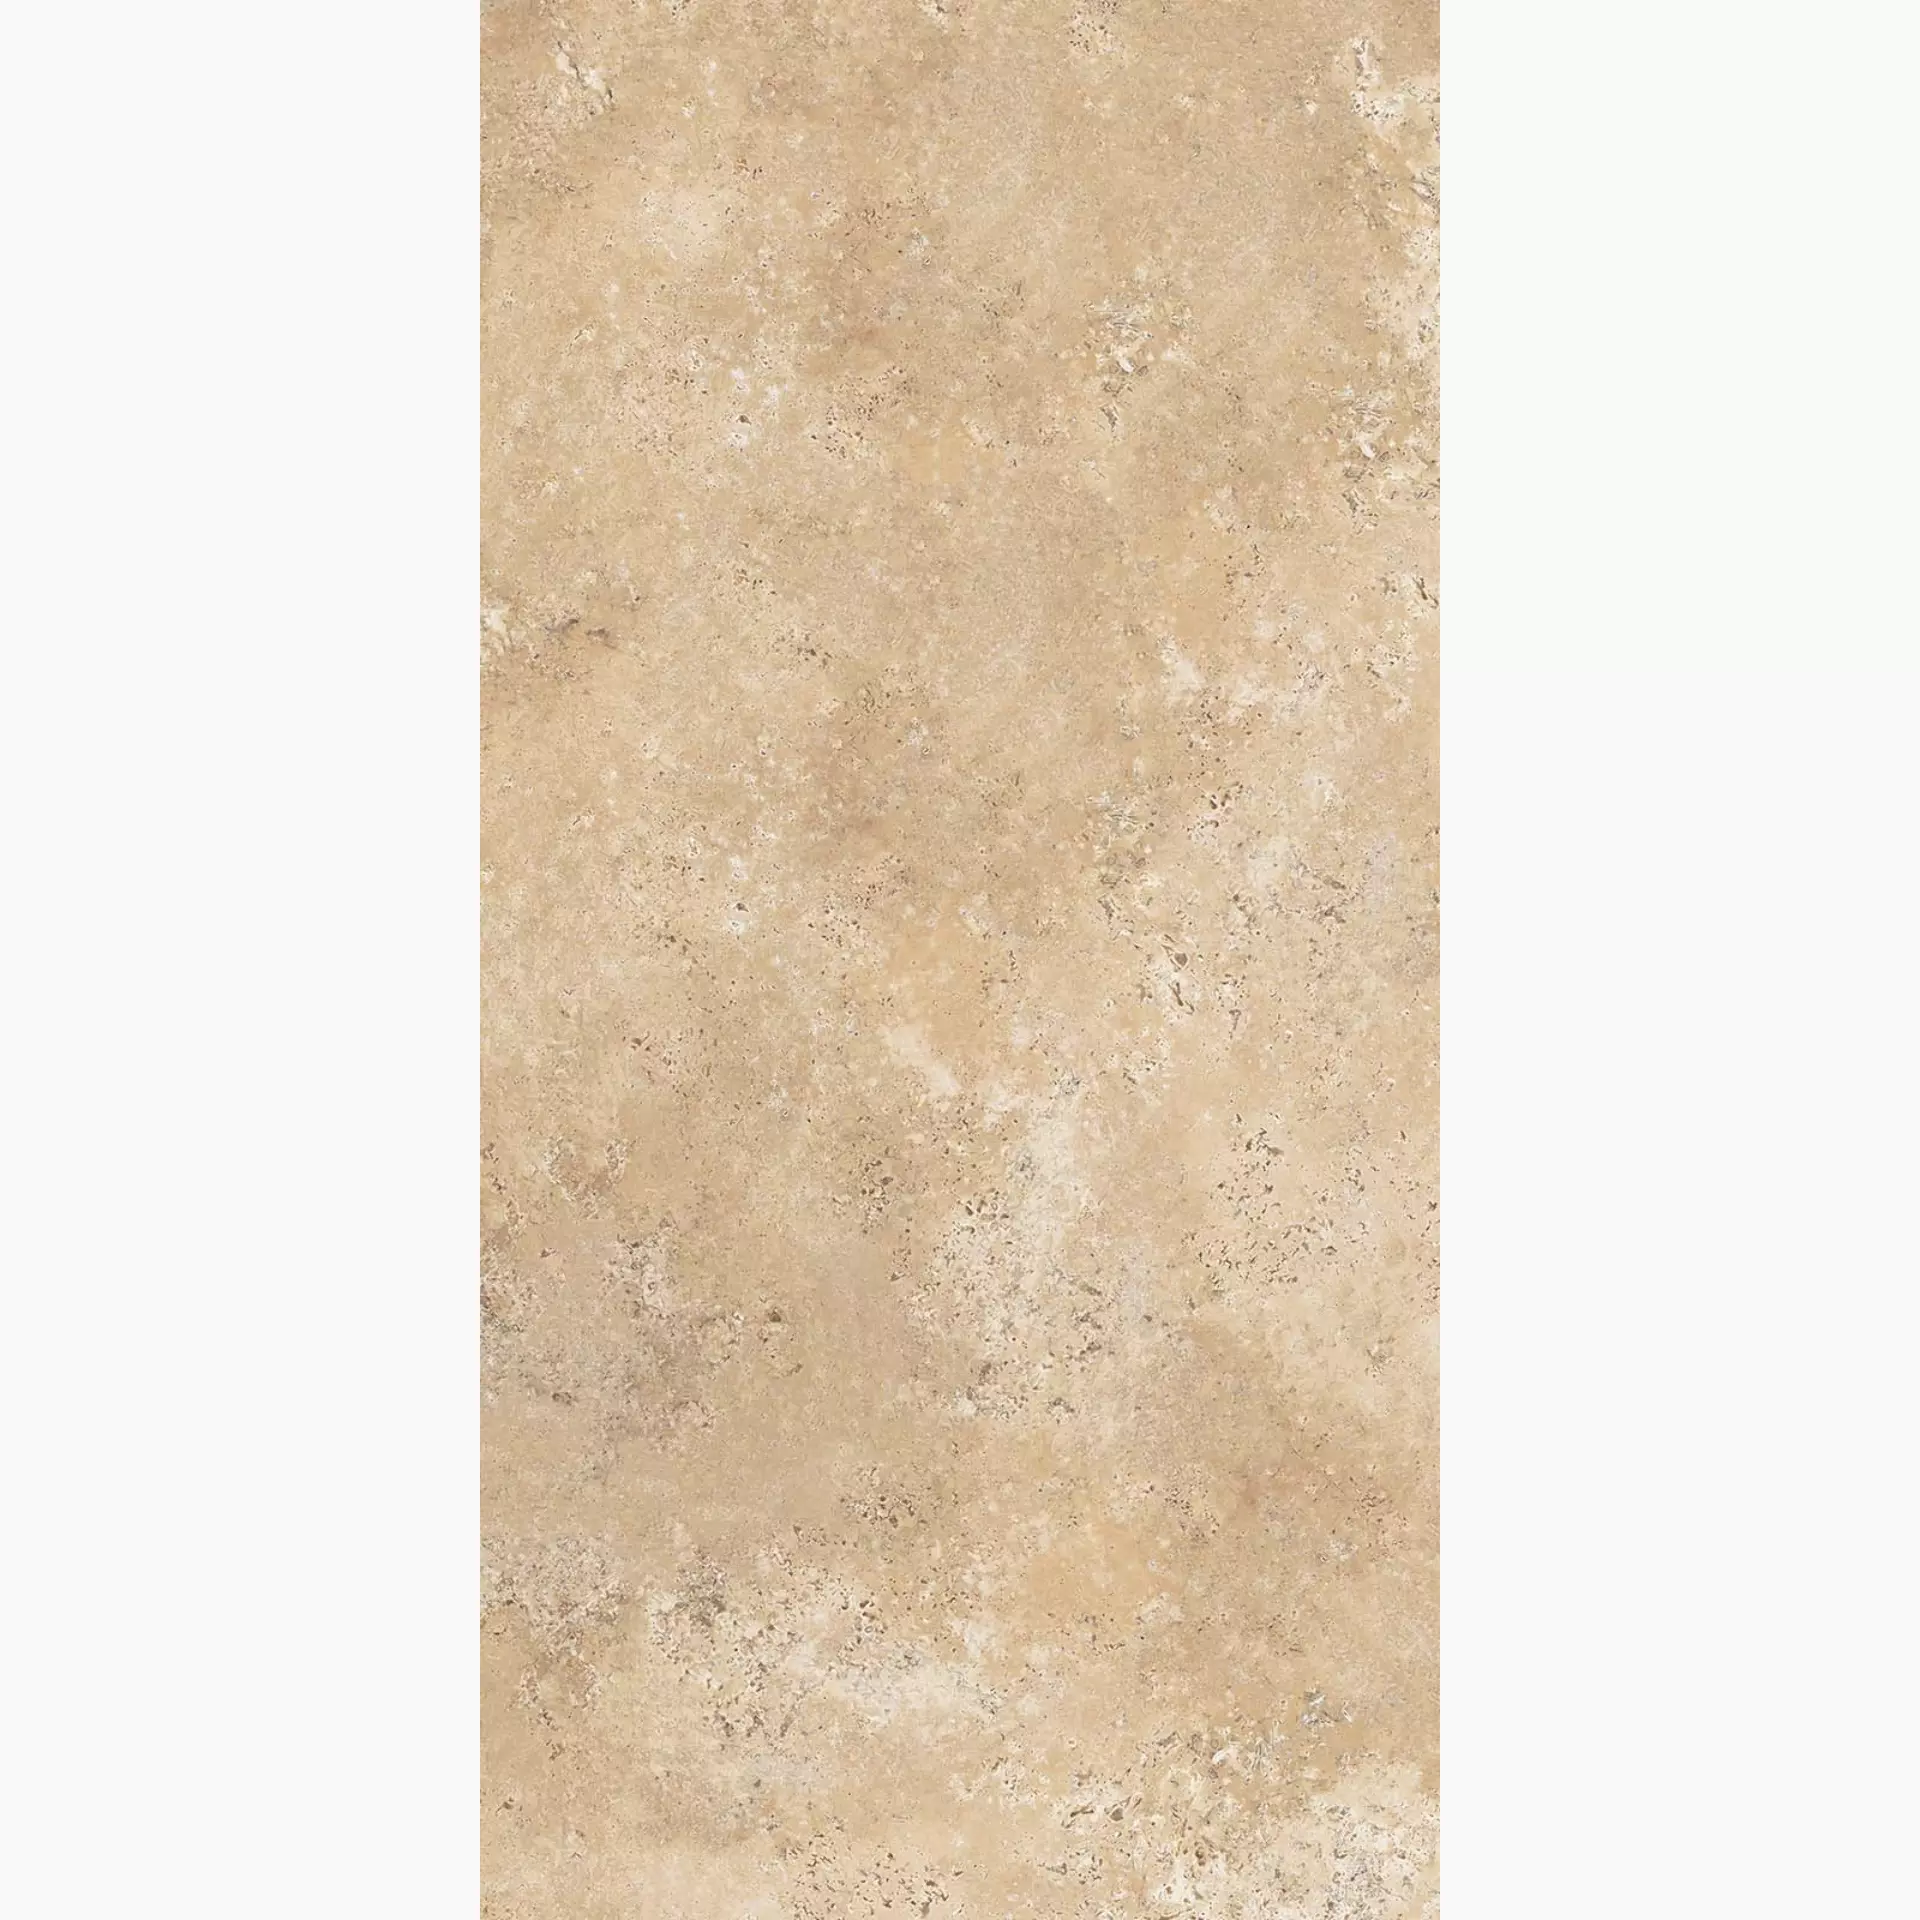 Keope Percorsi Frame Travertino Beige Spazzolato 474A5735 60x120cm rectified 20mm